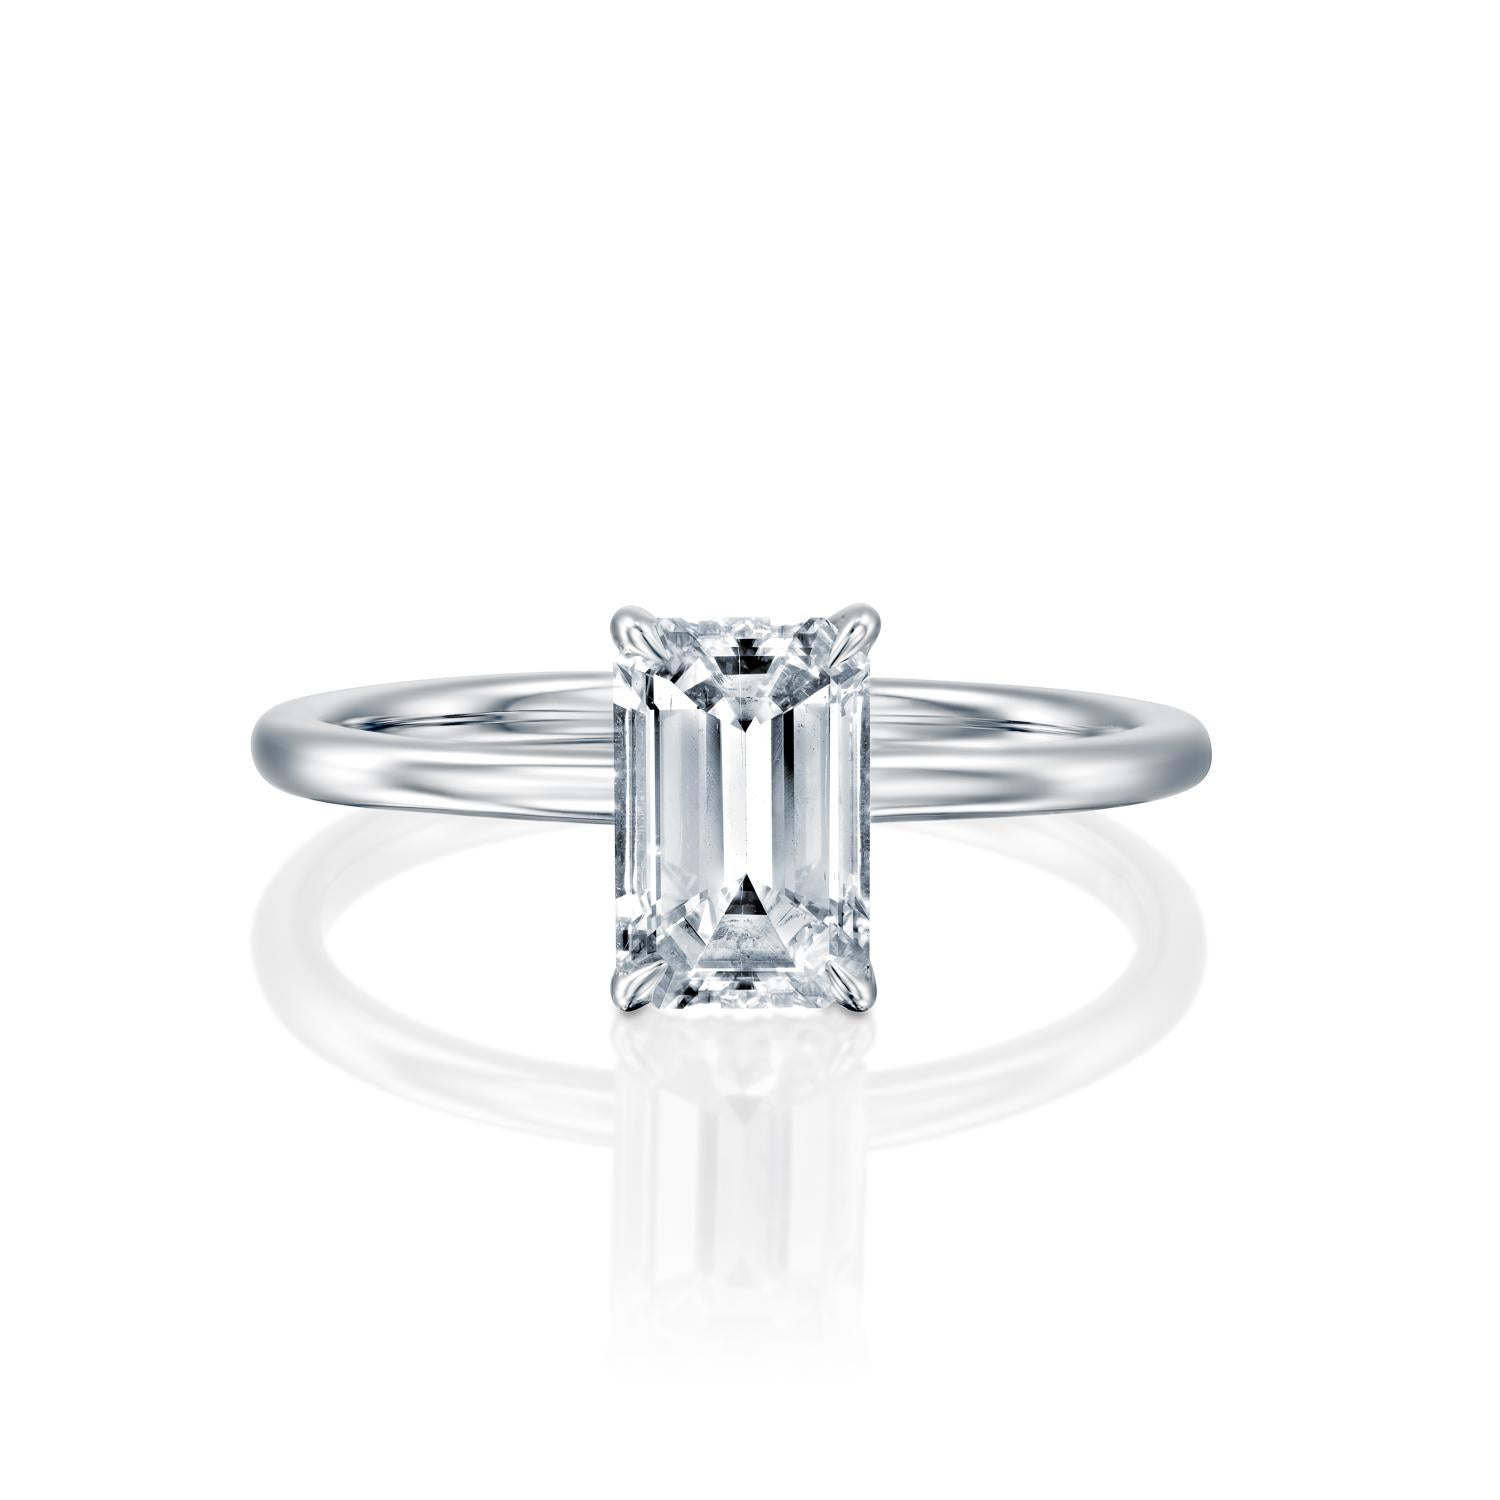 This breathtaking ring features a solitaire GIA certified diamond. Ring features a 1 carat emerald cut 100% eye clean natural diamond of F-G color and VS2-SI1 clarity. Set in a sleek, 18K white gold, solitaire ring with a 4-prong setting, this